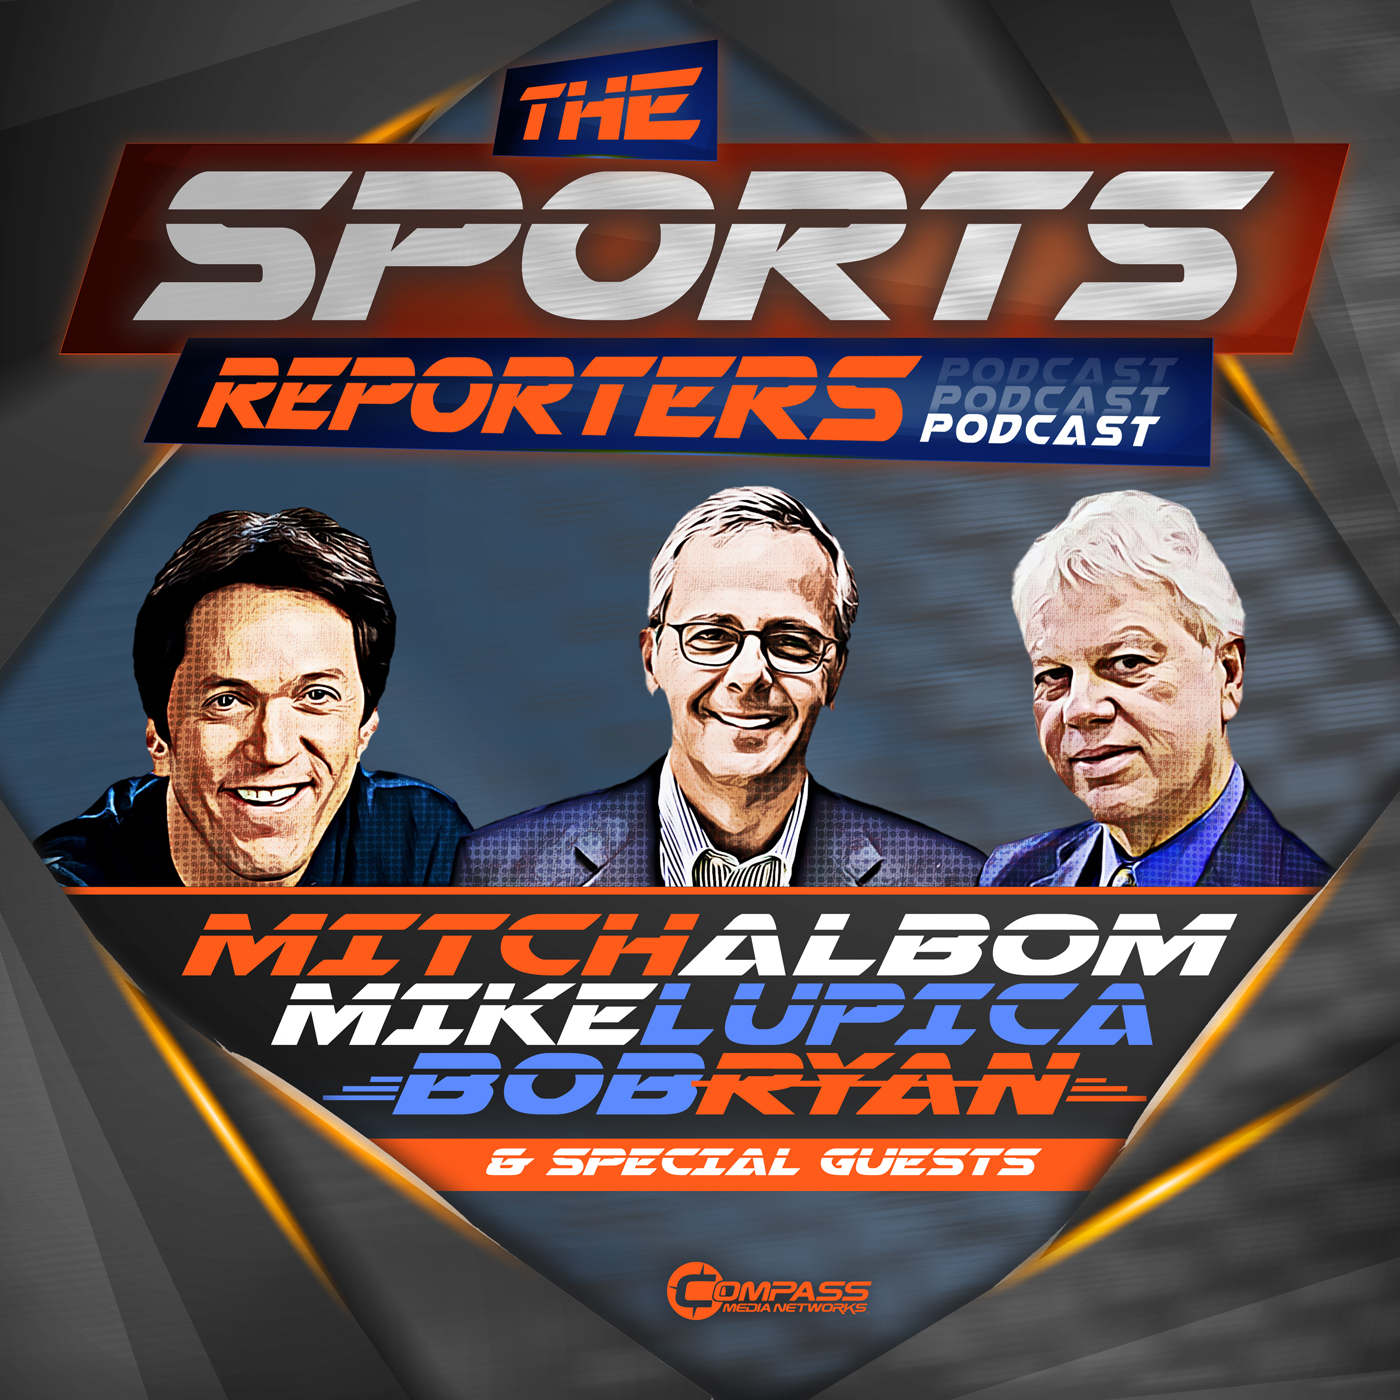 The Sports Reporters - Episode 188 - 2019 NBA Draft Discussion. MLB Storylines